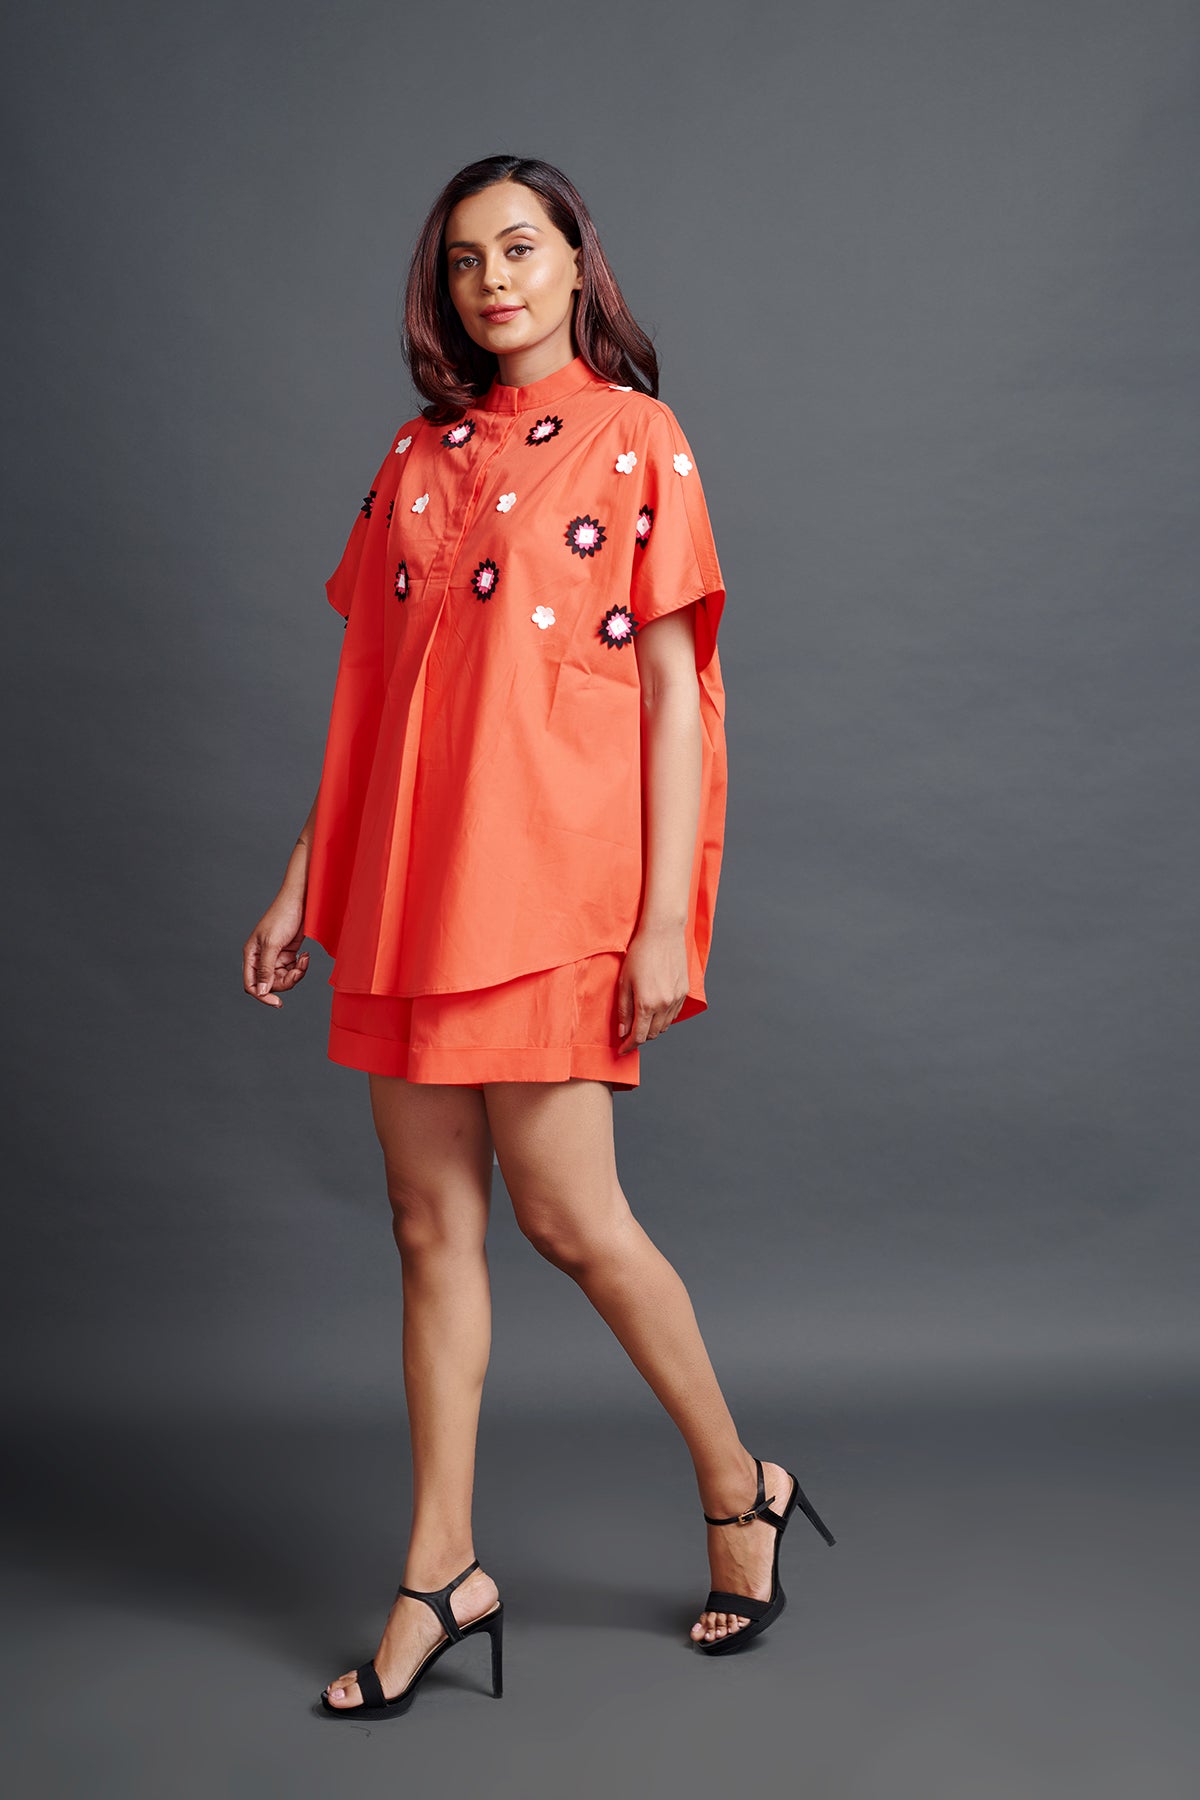 Image of ORANGE OVERSIZED SHIRT IN COTTON BASE WITH CUTWORK EMBROIDERY. IT IS PAIRED WITH MATCHING SHORTS., From savoirfashions.com